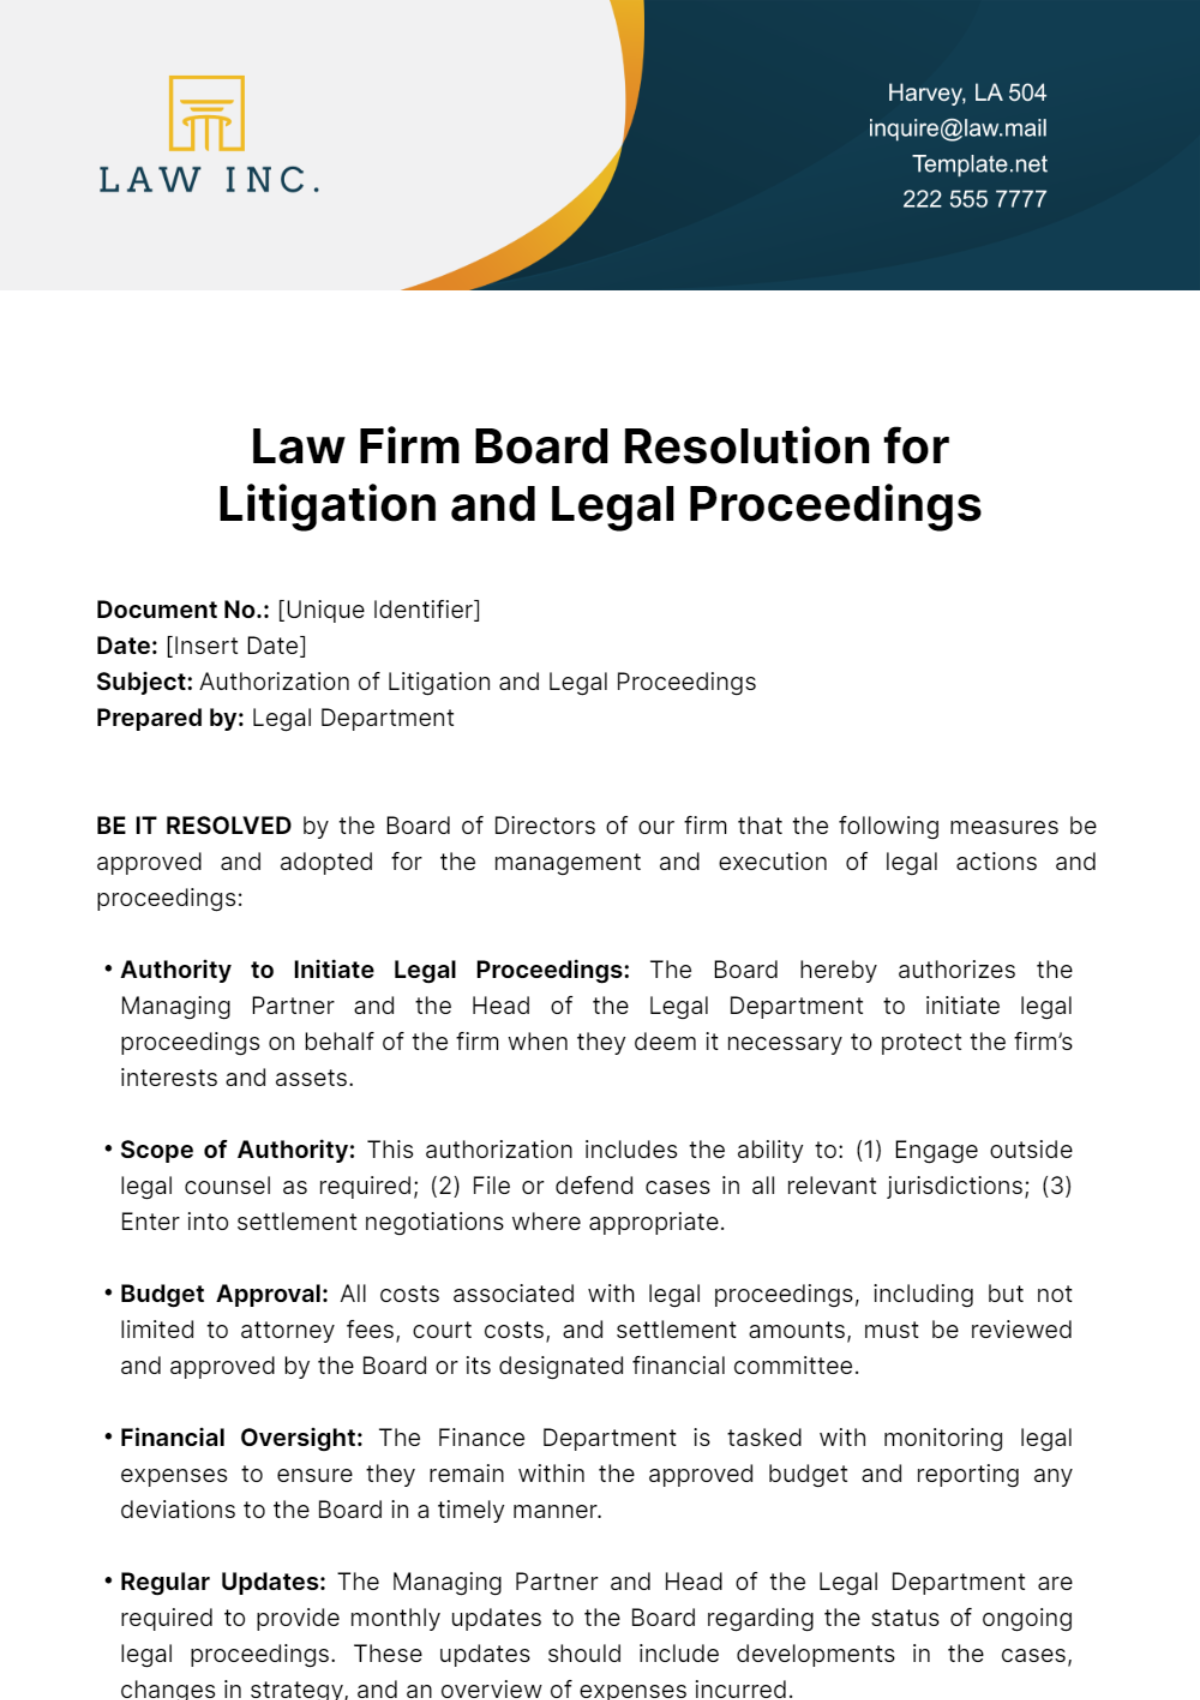 Free Law Firm Board Resolution for Litigation and Legal Proceedings Template